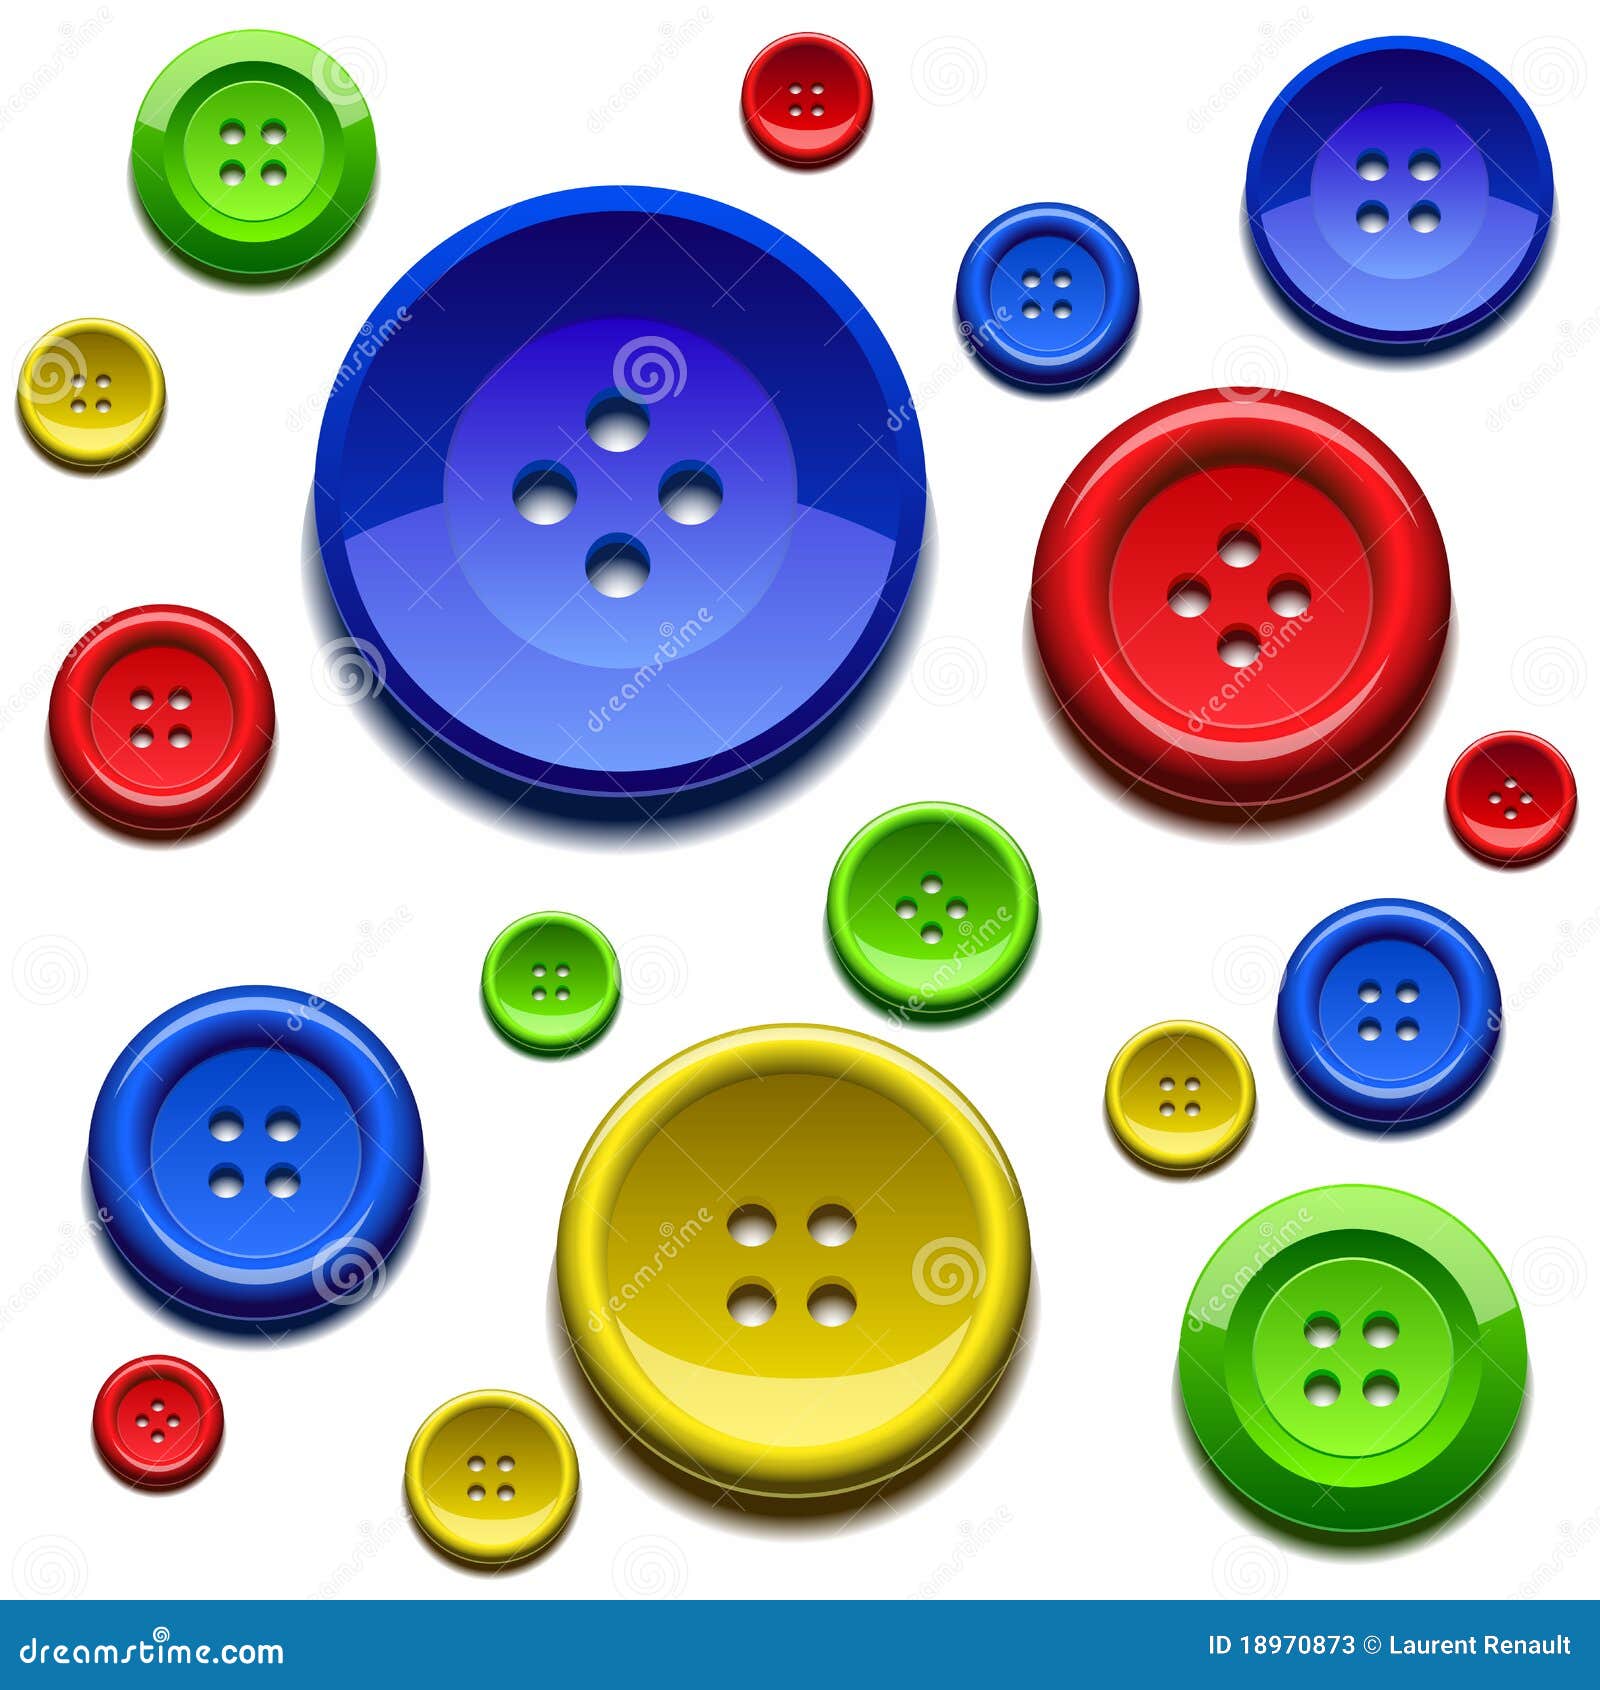 9,984 Shiny Clothes Buttons Images, Stock Photos, 3D objects, & Vectors